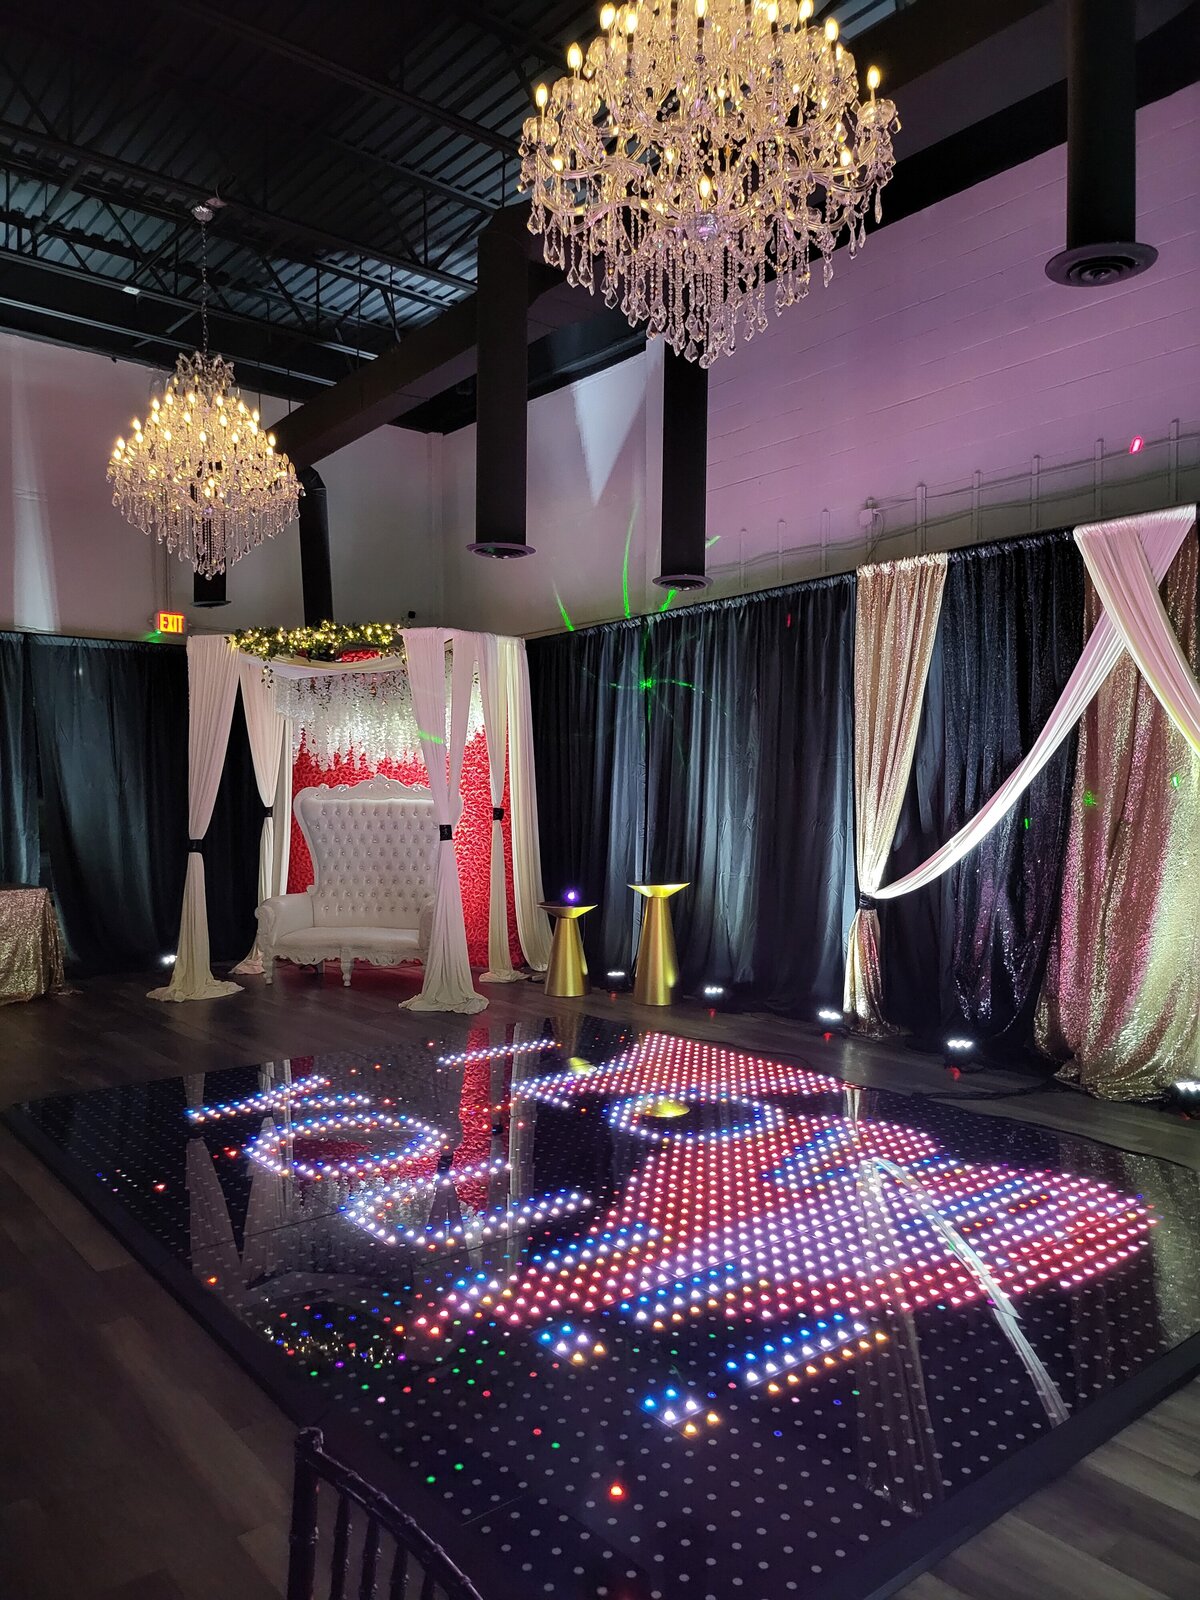 LED Dance Floor and Throne Chair Rental in Metro Detroit Event Space 1